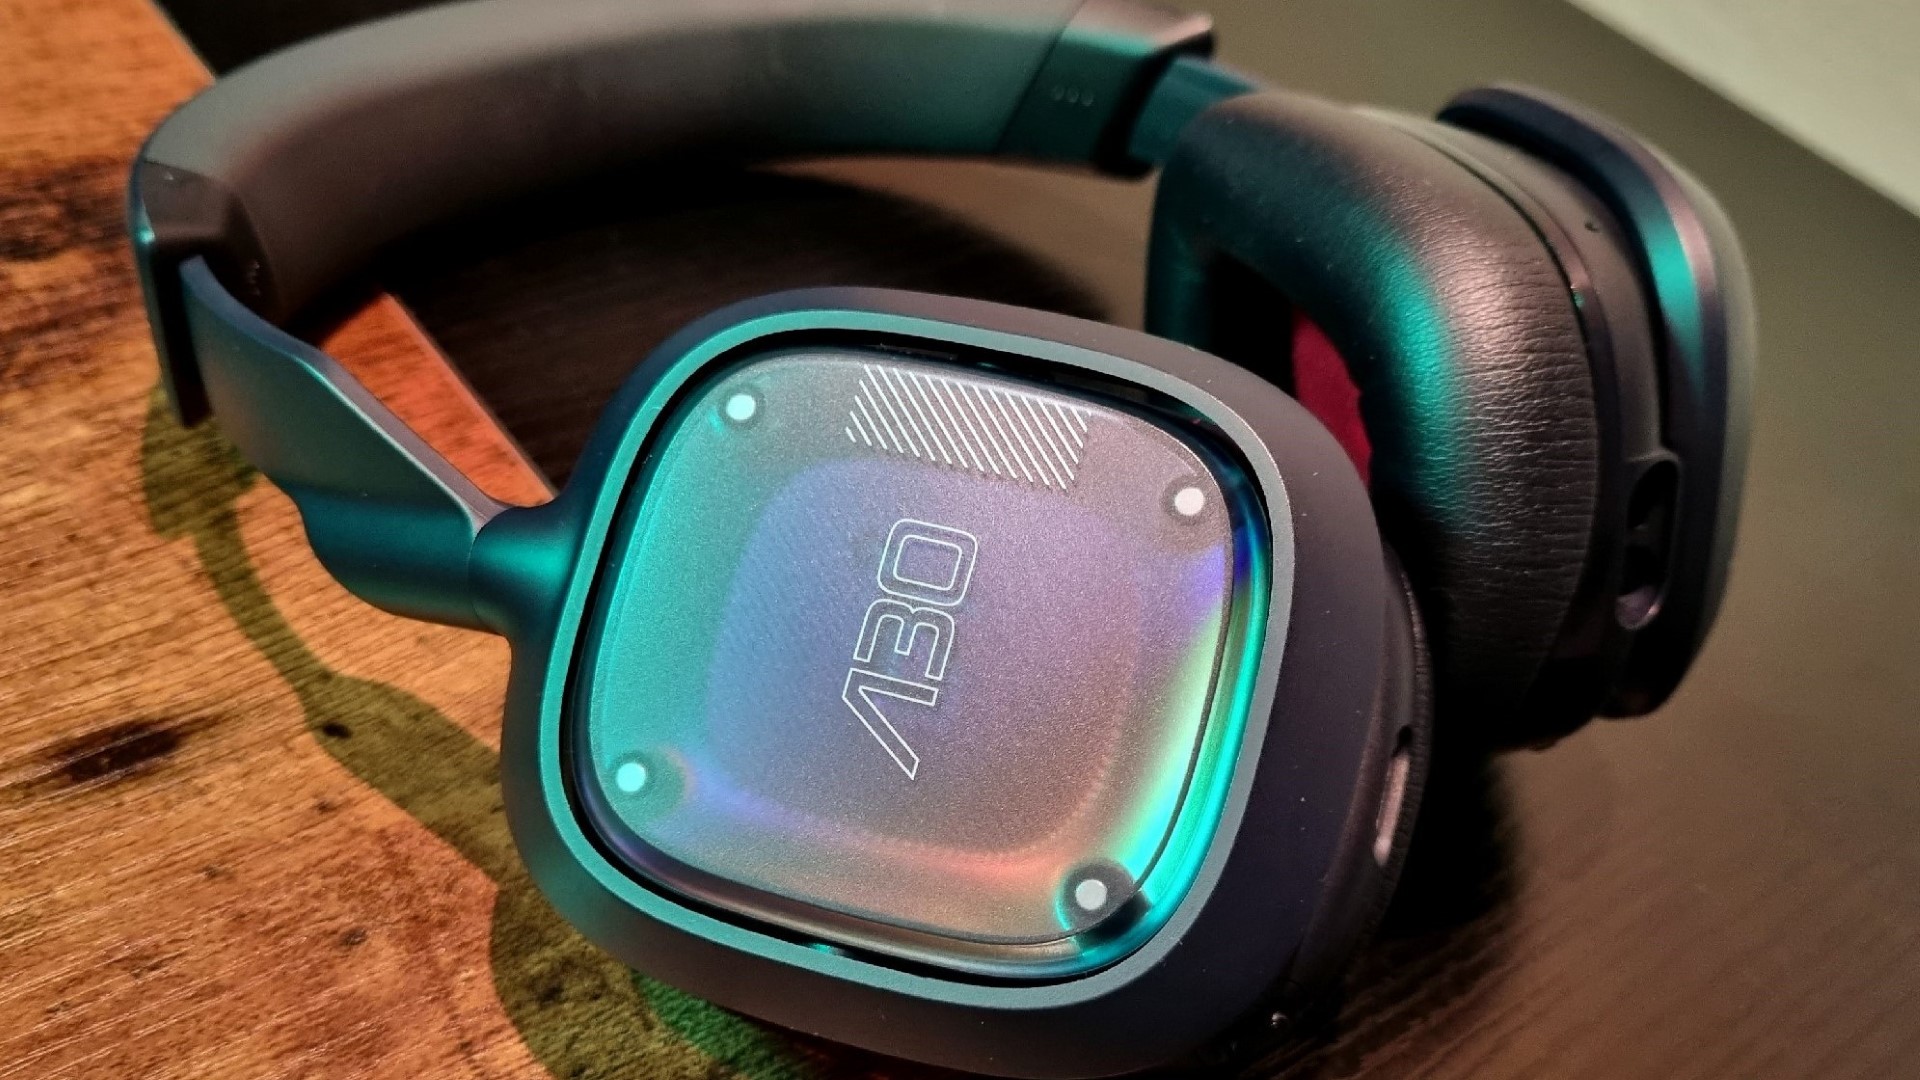 Astro Gaming A30 Headset 